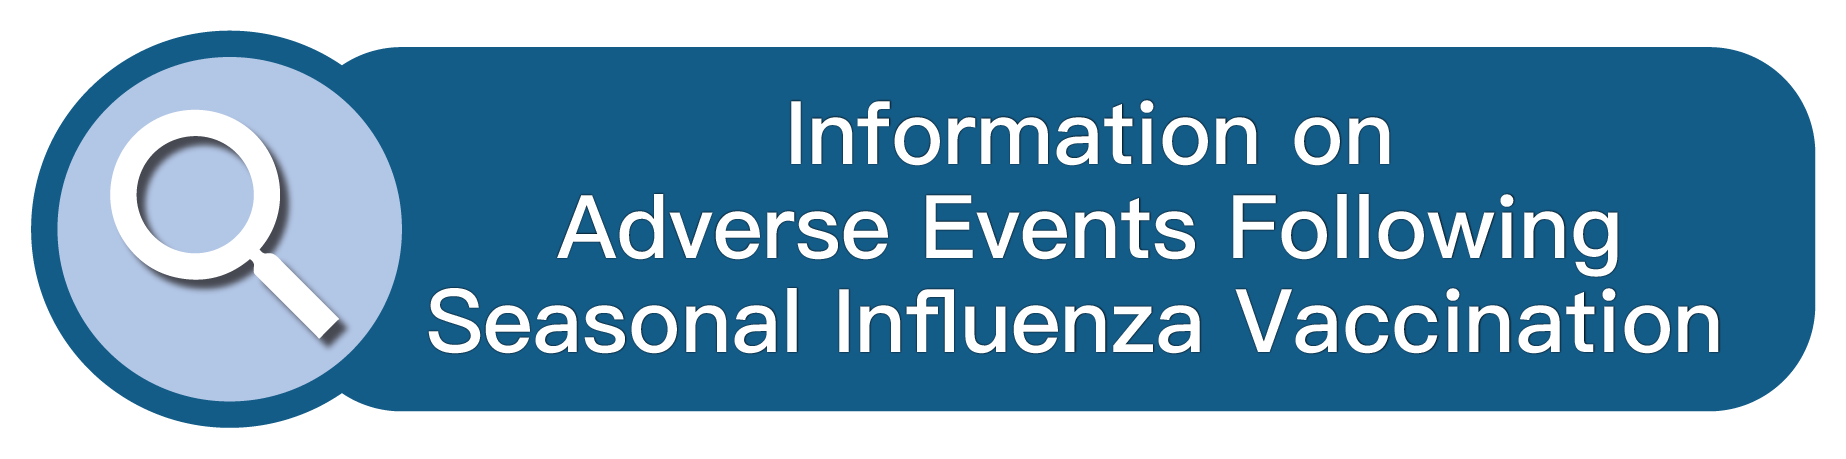 Information on Adverse Events Following Seasonal Influenza Vaccination